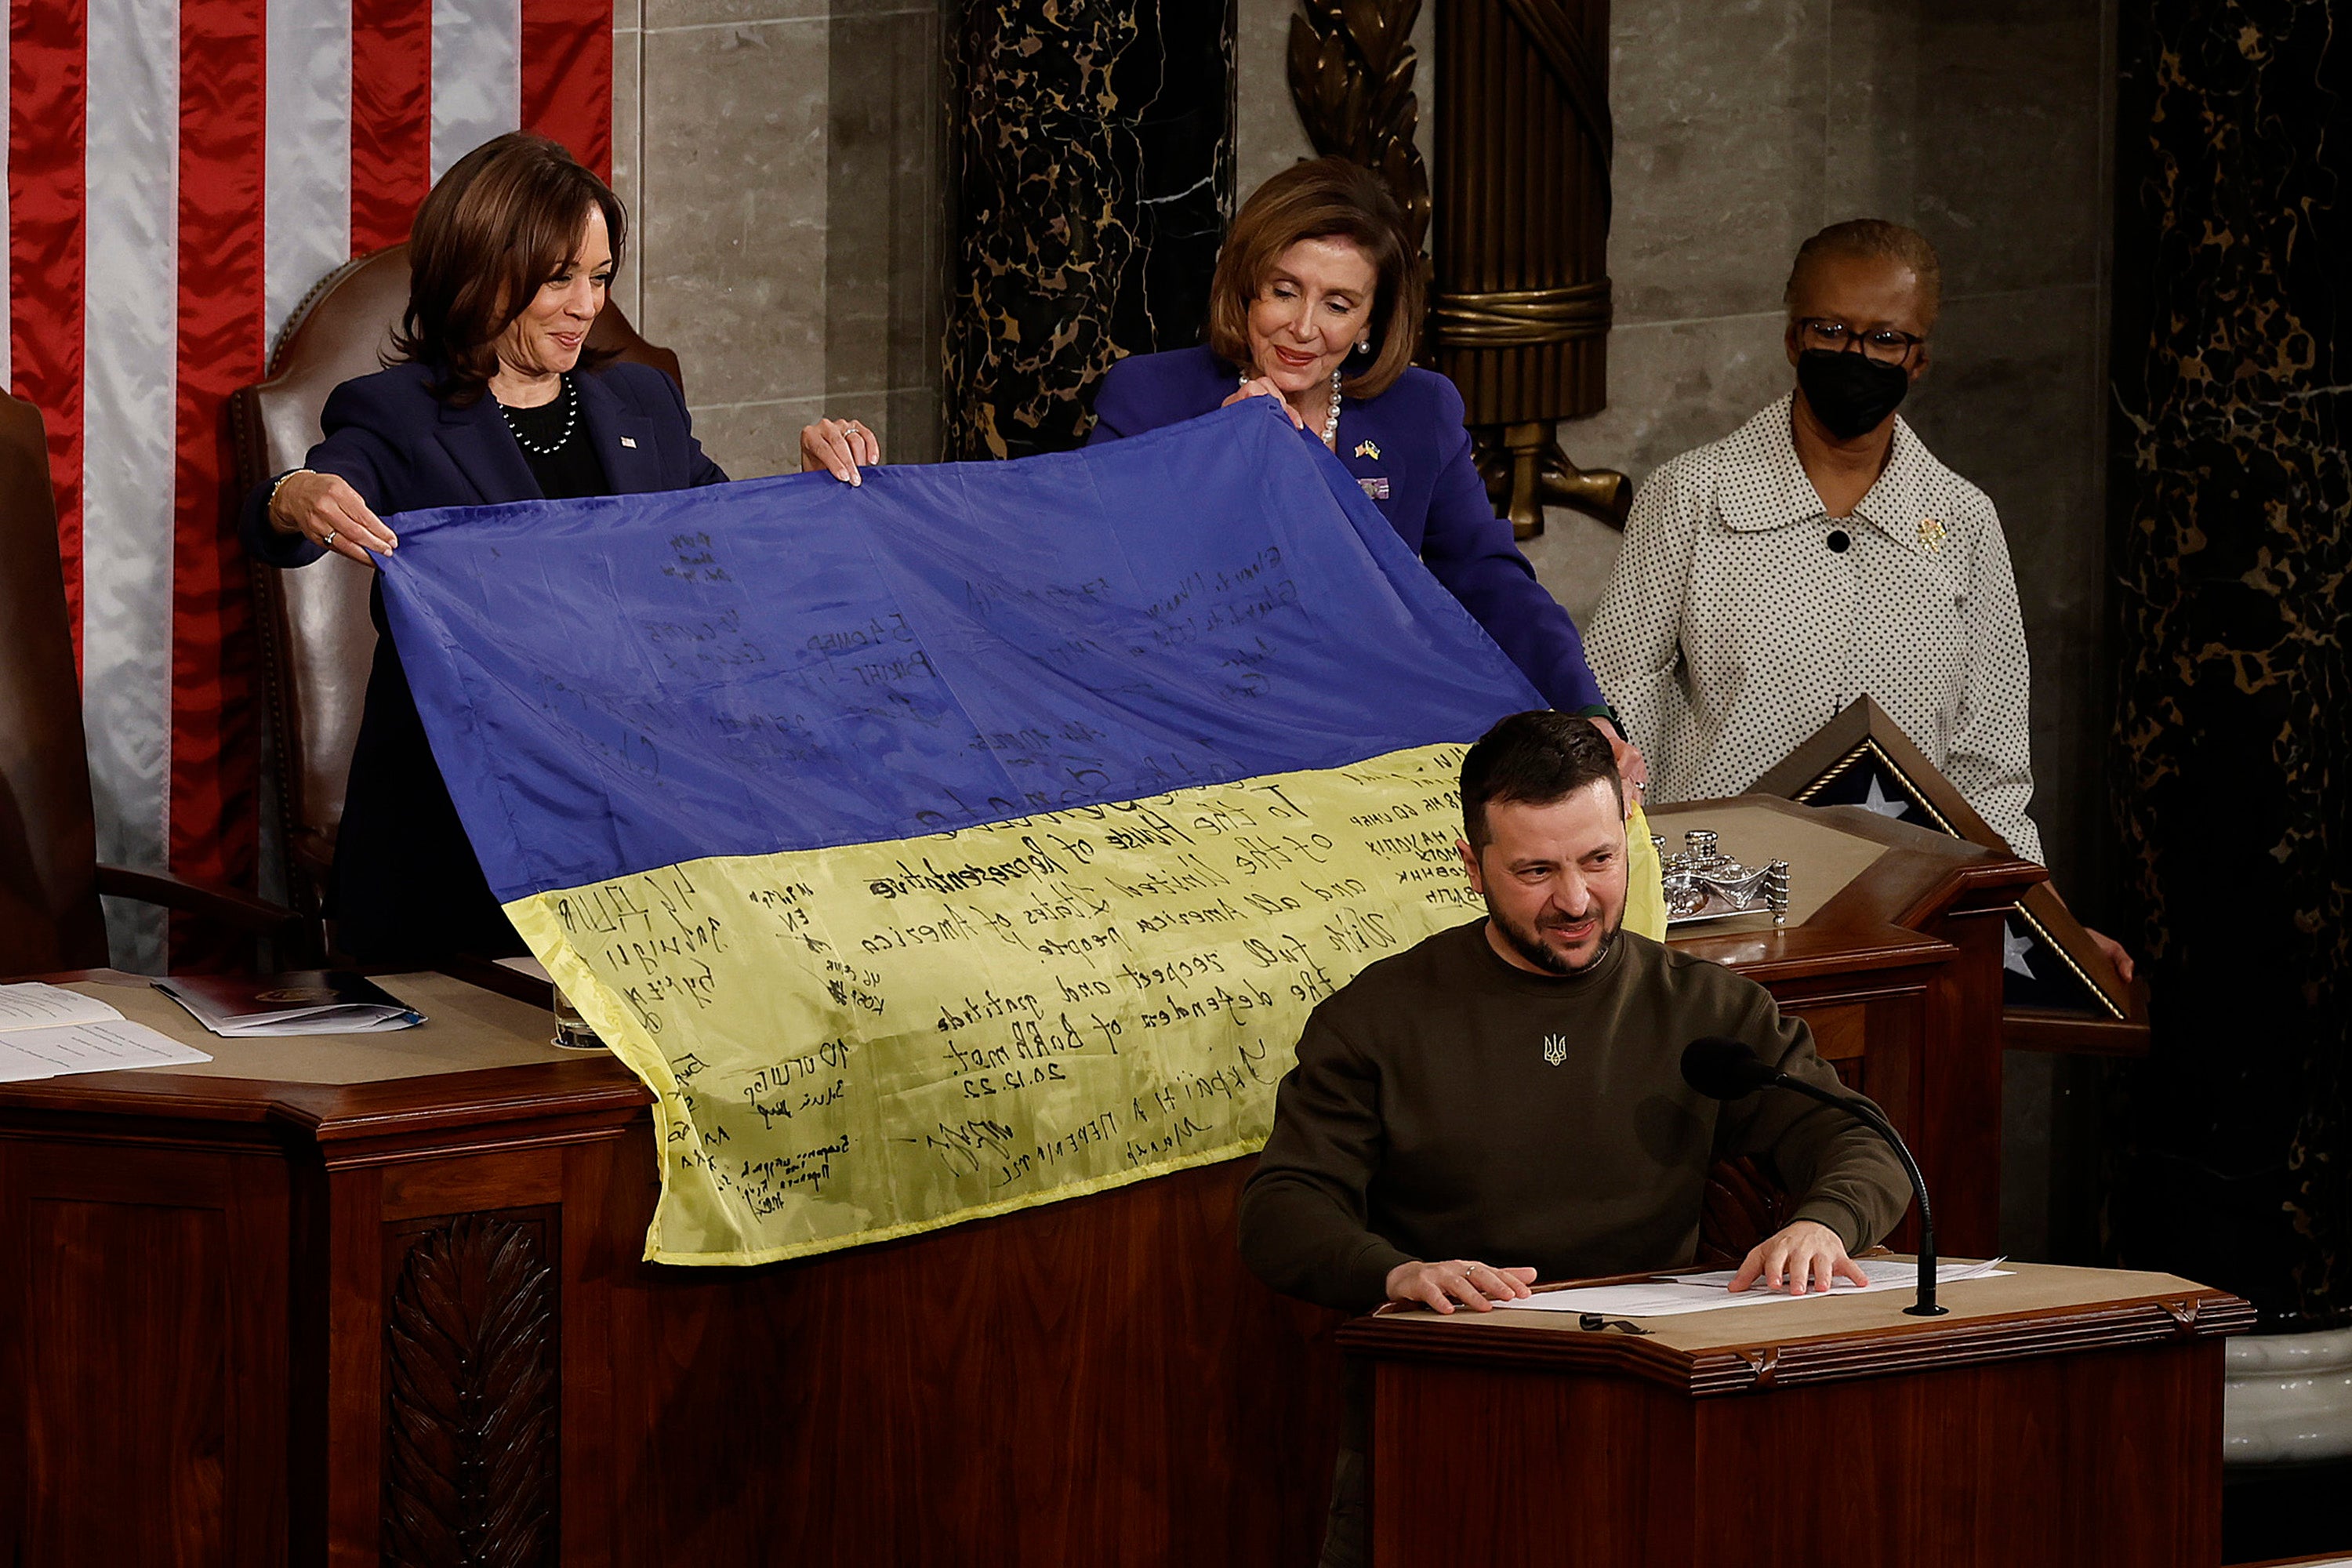 Nancy Pelosi and vice president Kamala Harris hold a Ukrainian flag signed by members of its military, given to them by Volodymyr Zelensky